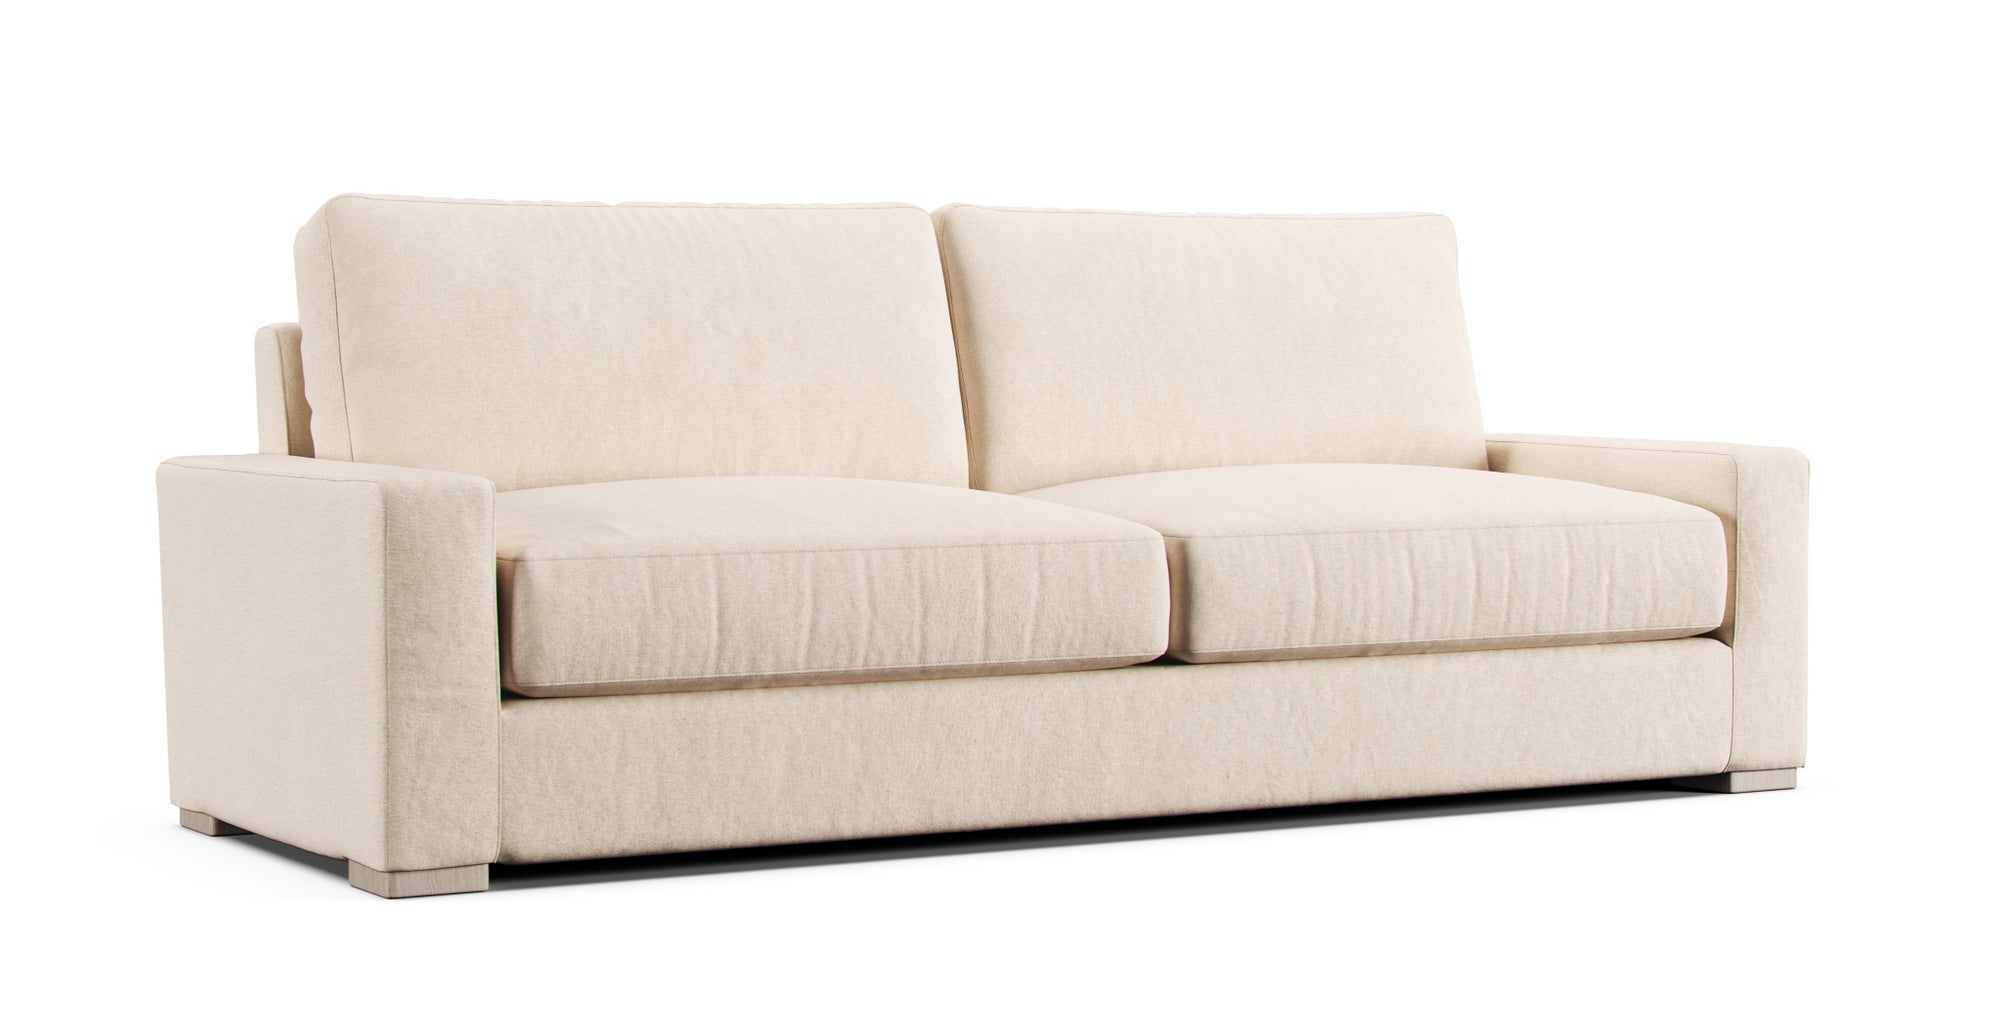 Replacement sofa covers for Restoration Hardware Maxwell